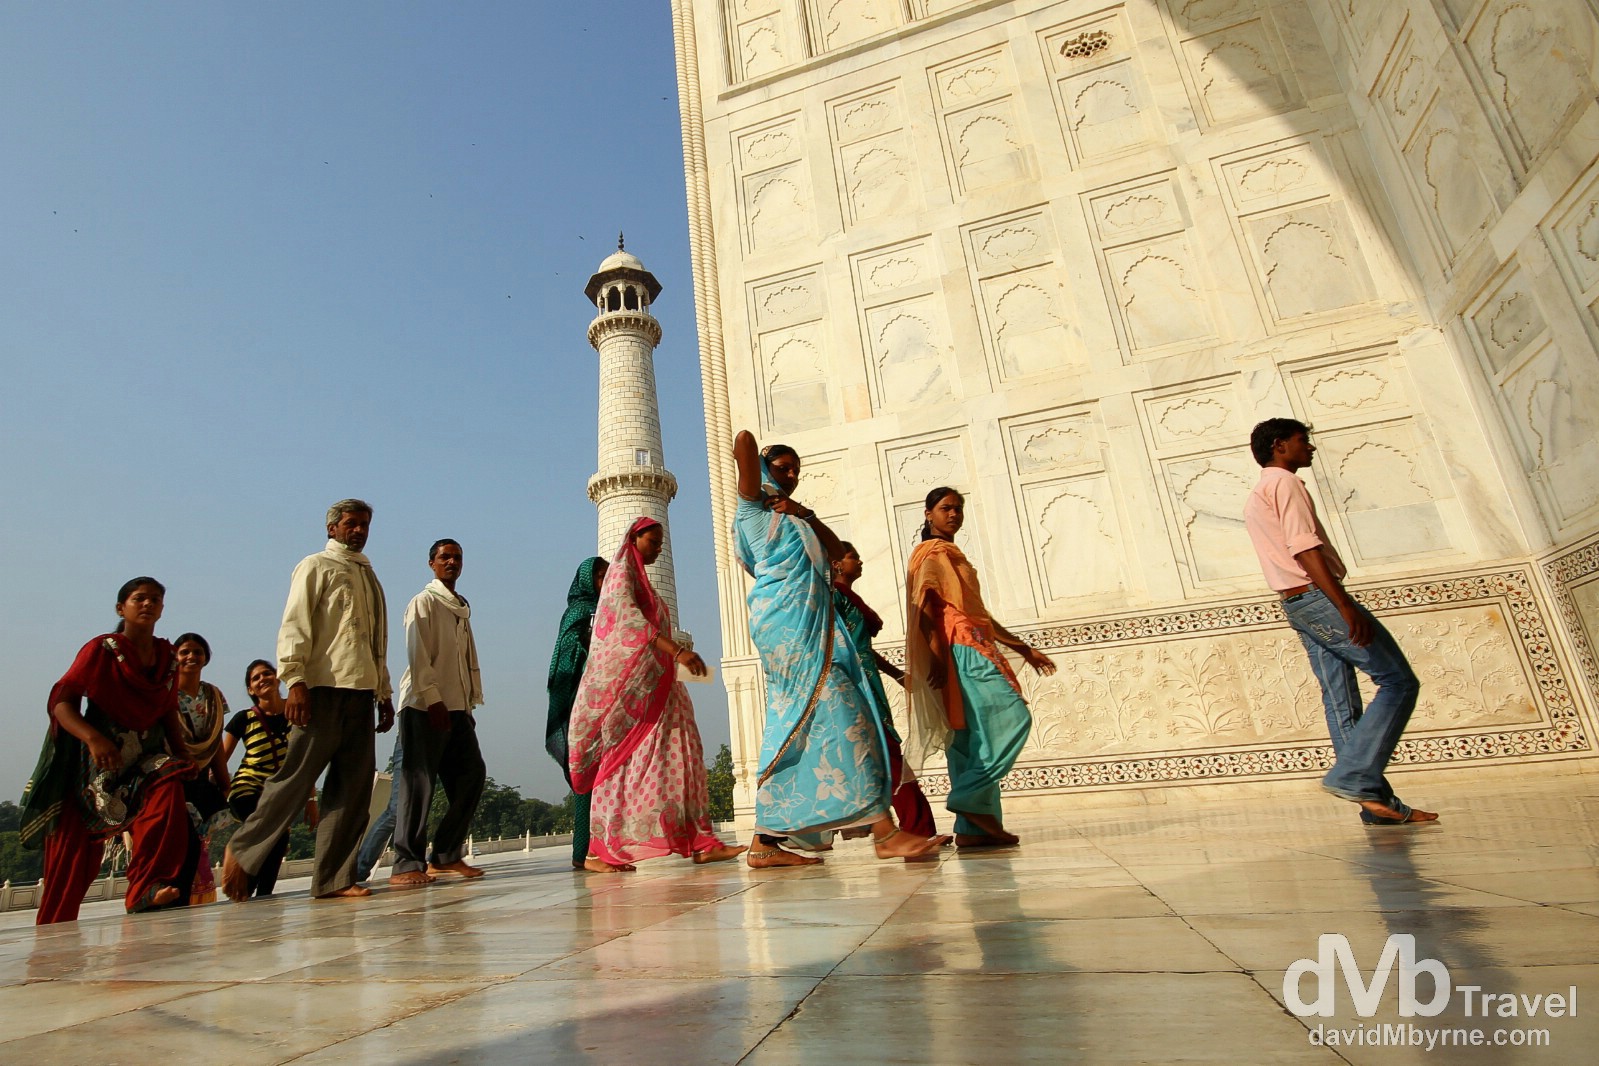 An Indian family entering the central burial chamber of the Taj Mahal in Agra, Uttar Pradesh, India. October 11th 2012.